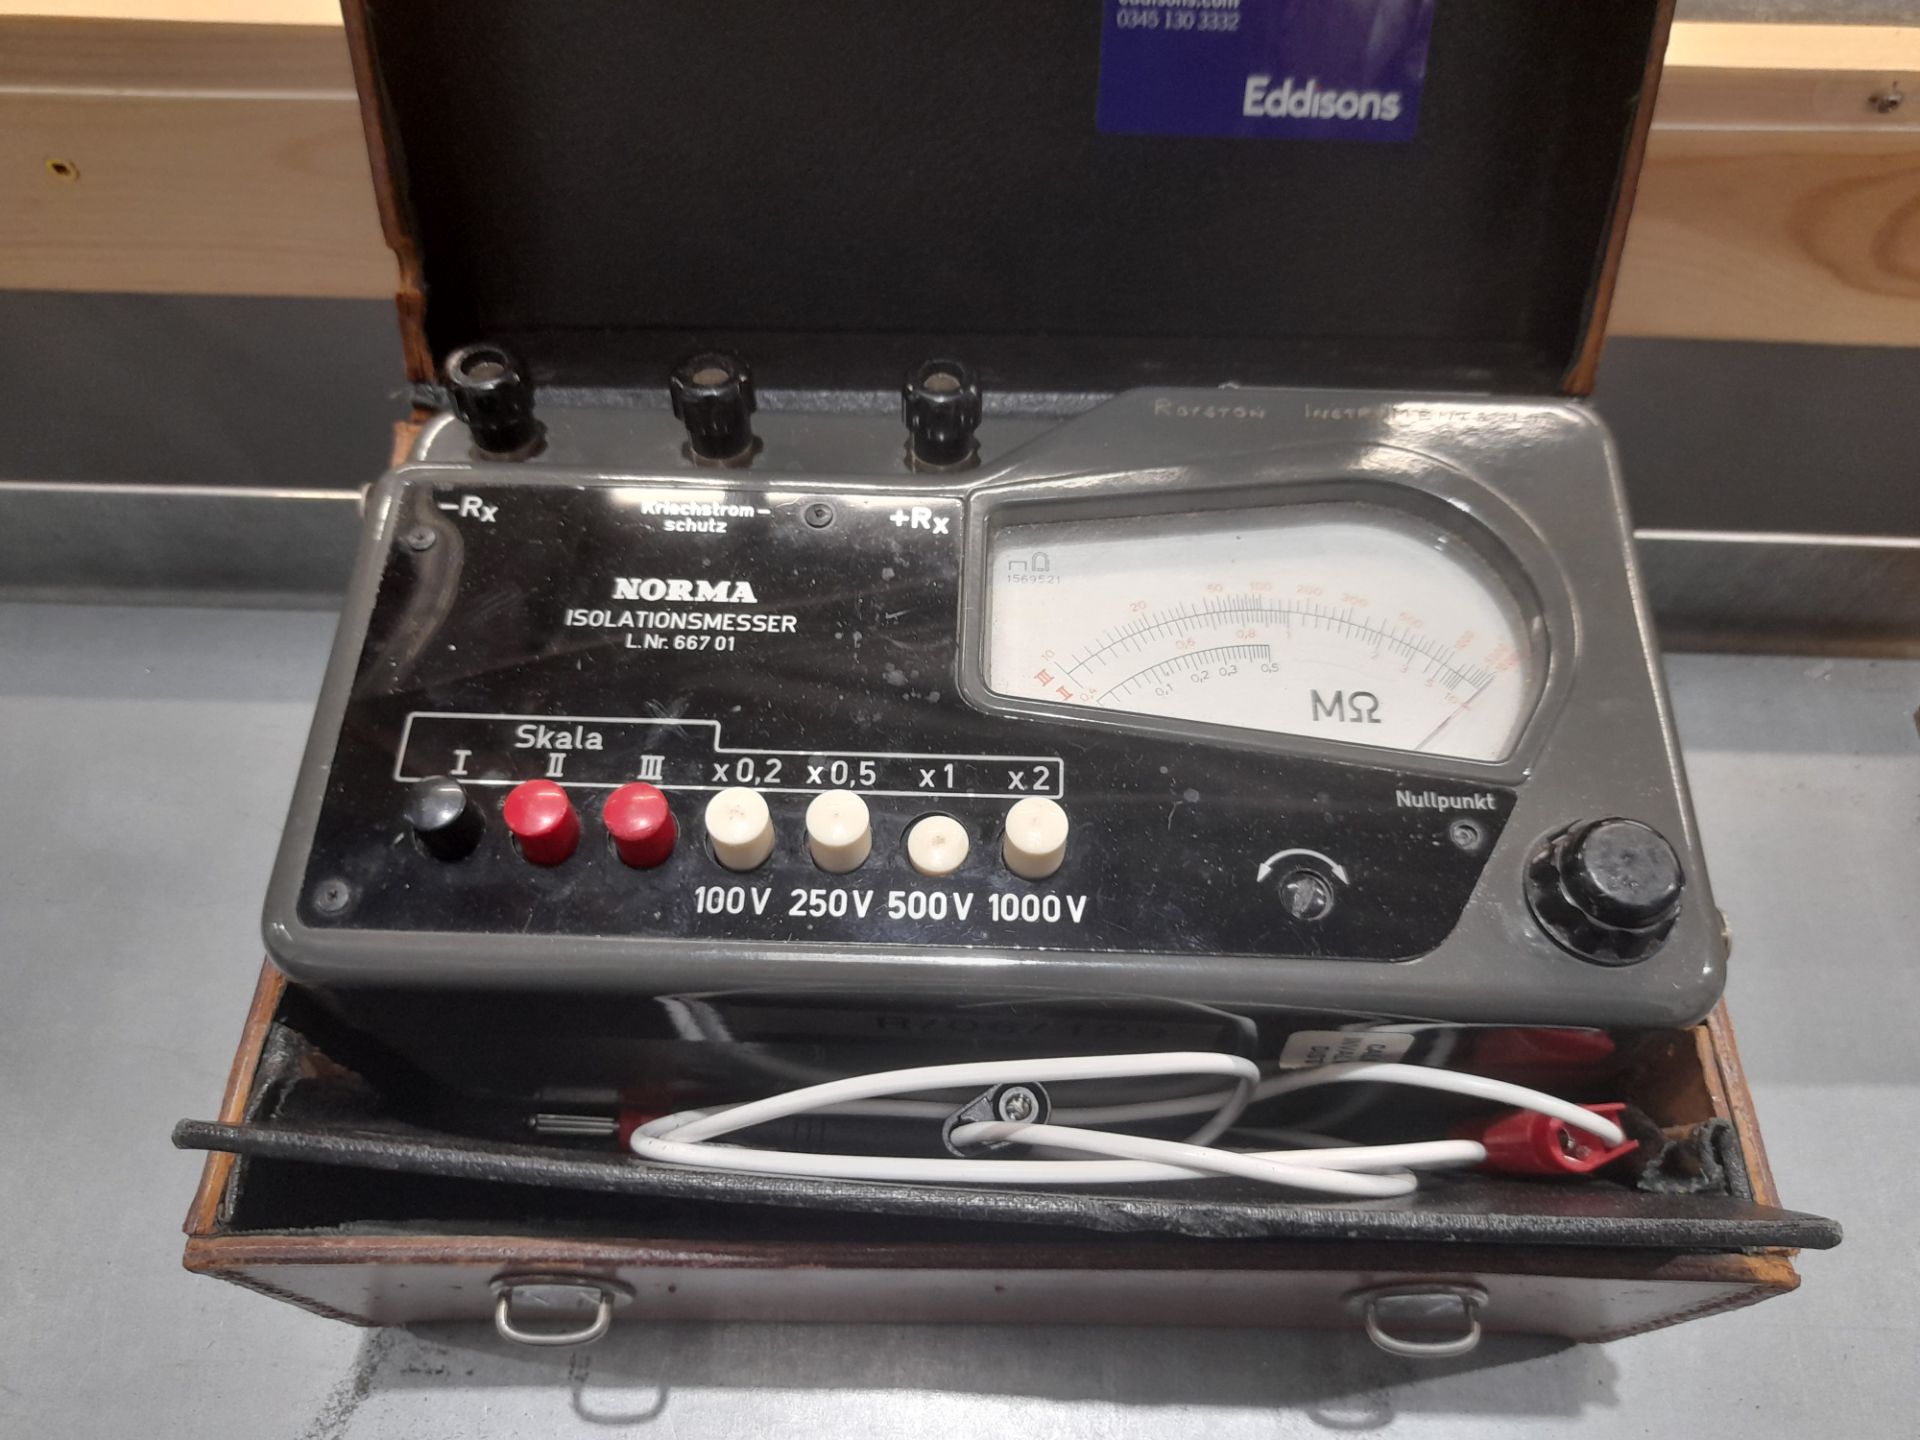 Norma 'IsolationMesser' insulation tester, L.N 66701 - Image 2 of 2